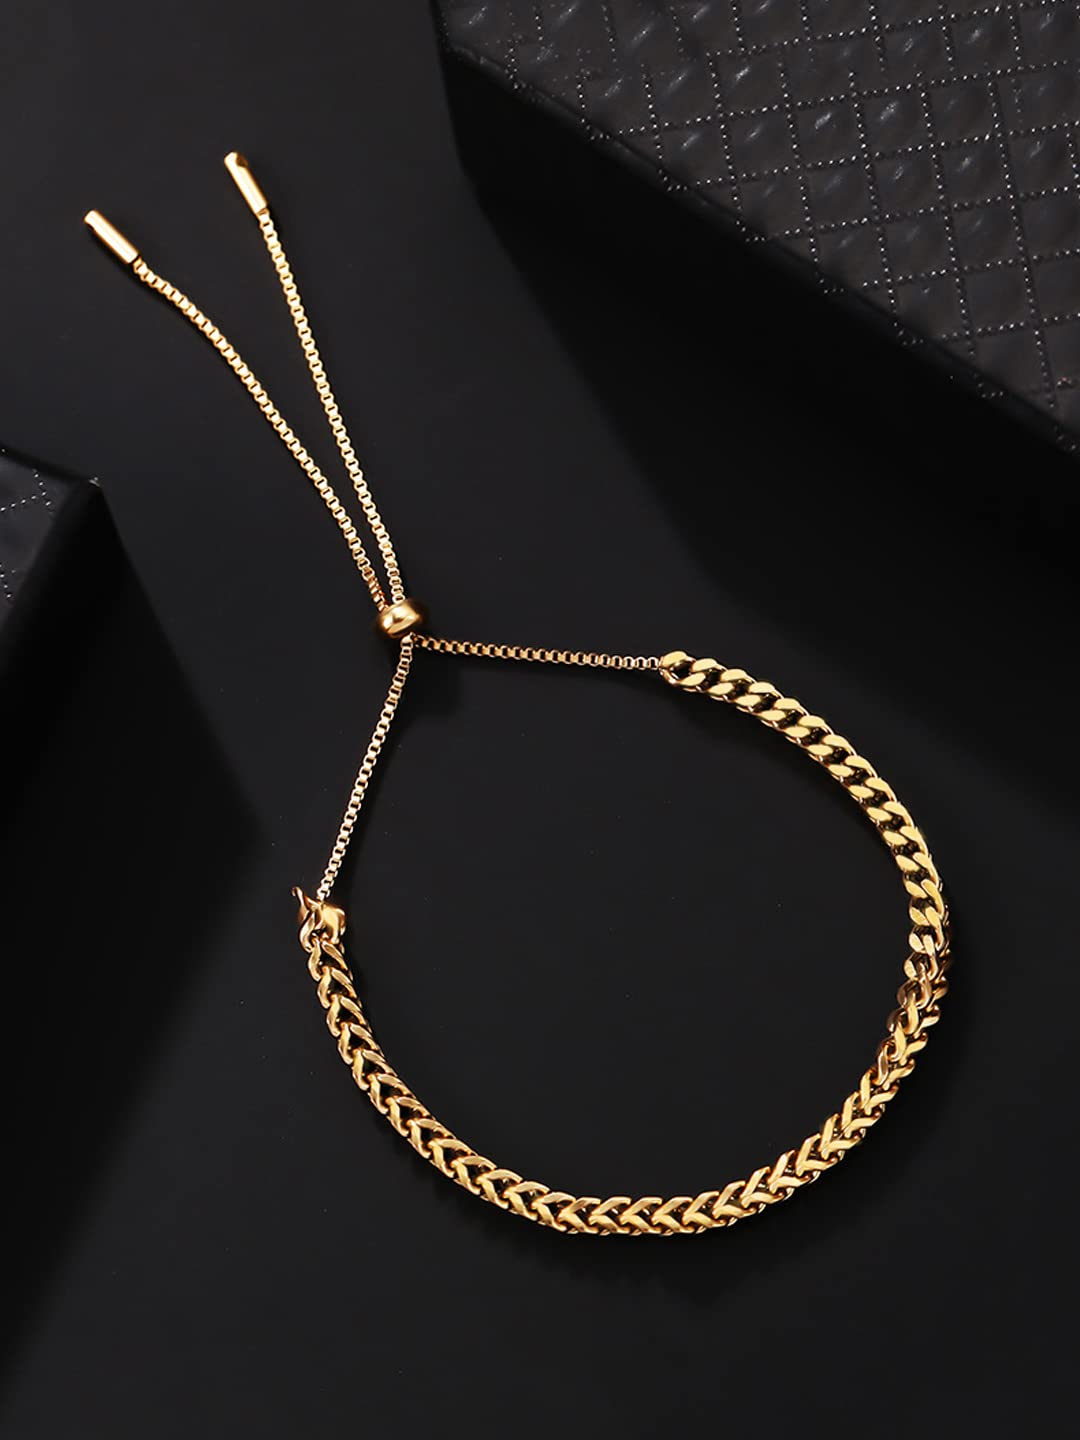 Yellow Chimes Chain Bracelet for Women Gold Plated Adjustable Drawstring Stainless Steel Chain Bracelet for Women and Girls